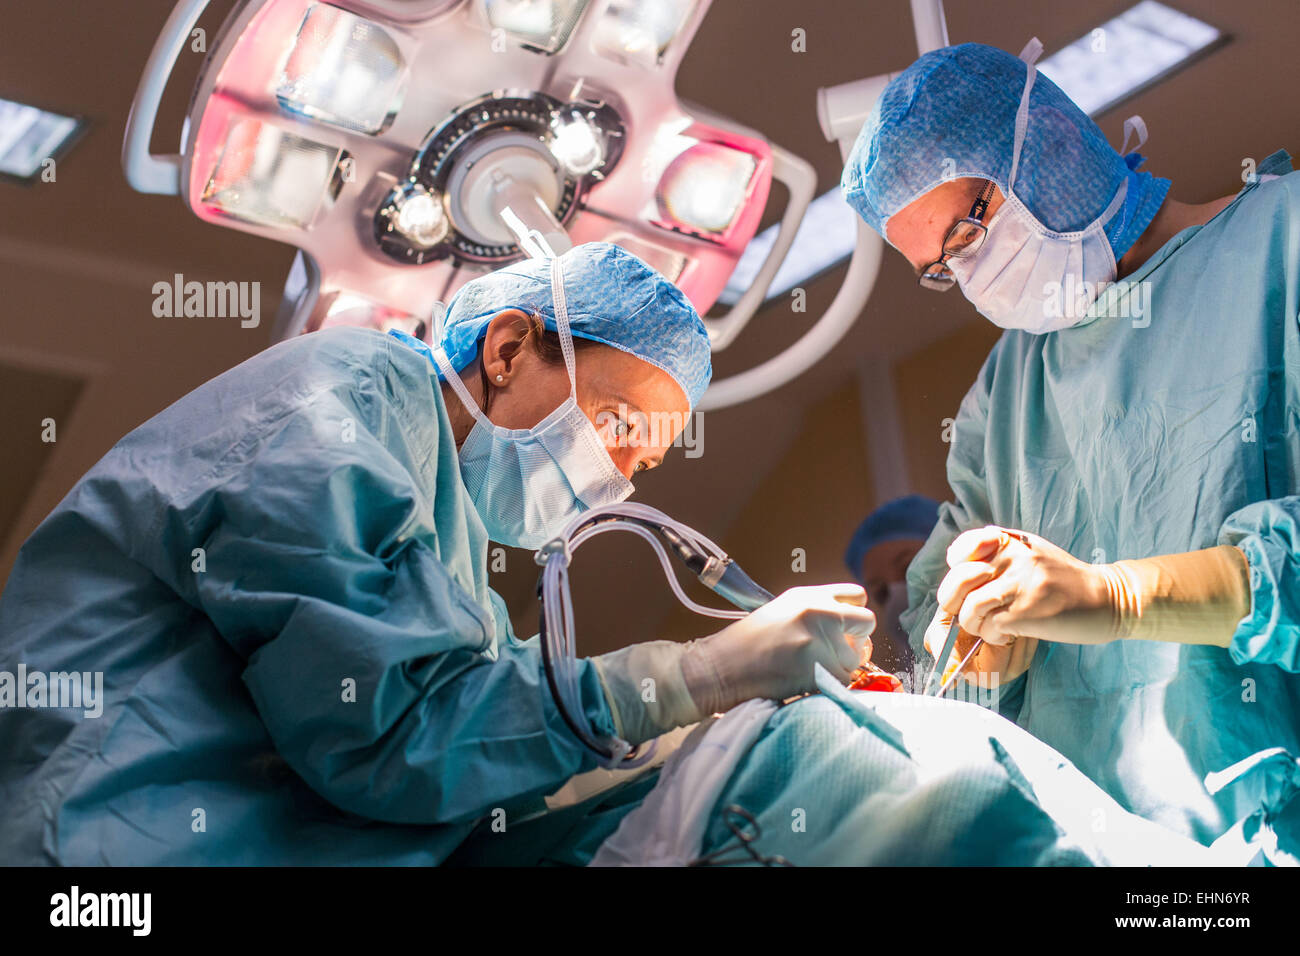 Surgeon performing cochlear implant surgery, an operation involving the implantation of a small electronic device used to provide a sense of sound to a deaf person, Limoges hospital, France. Stock Photo